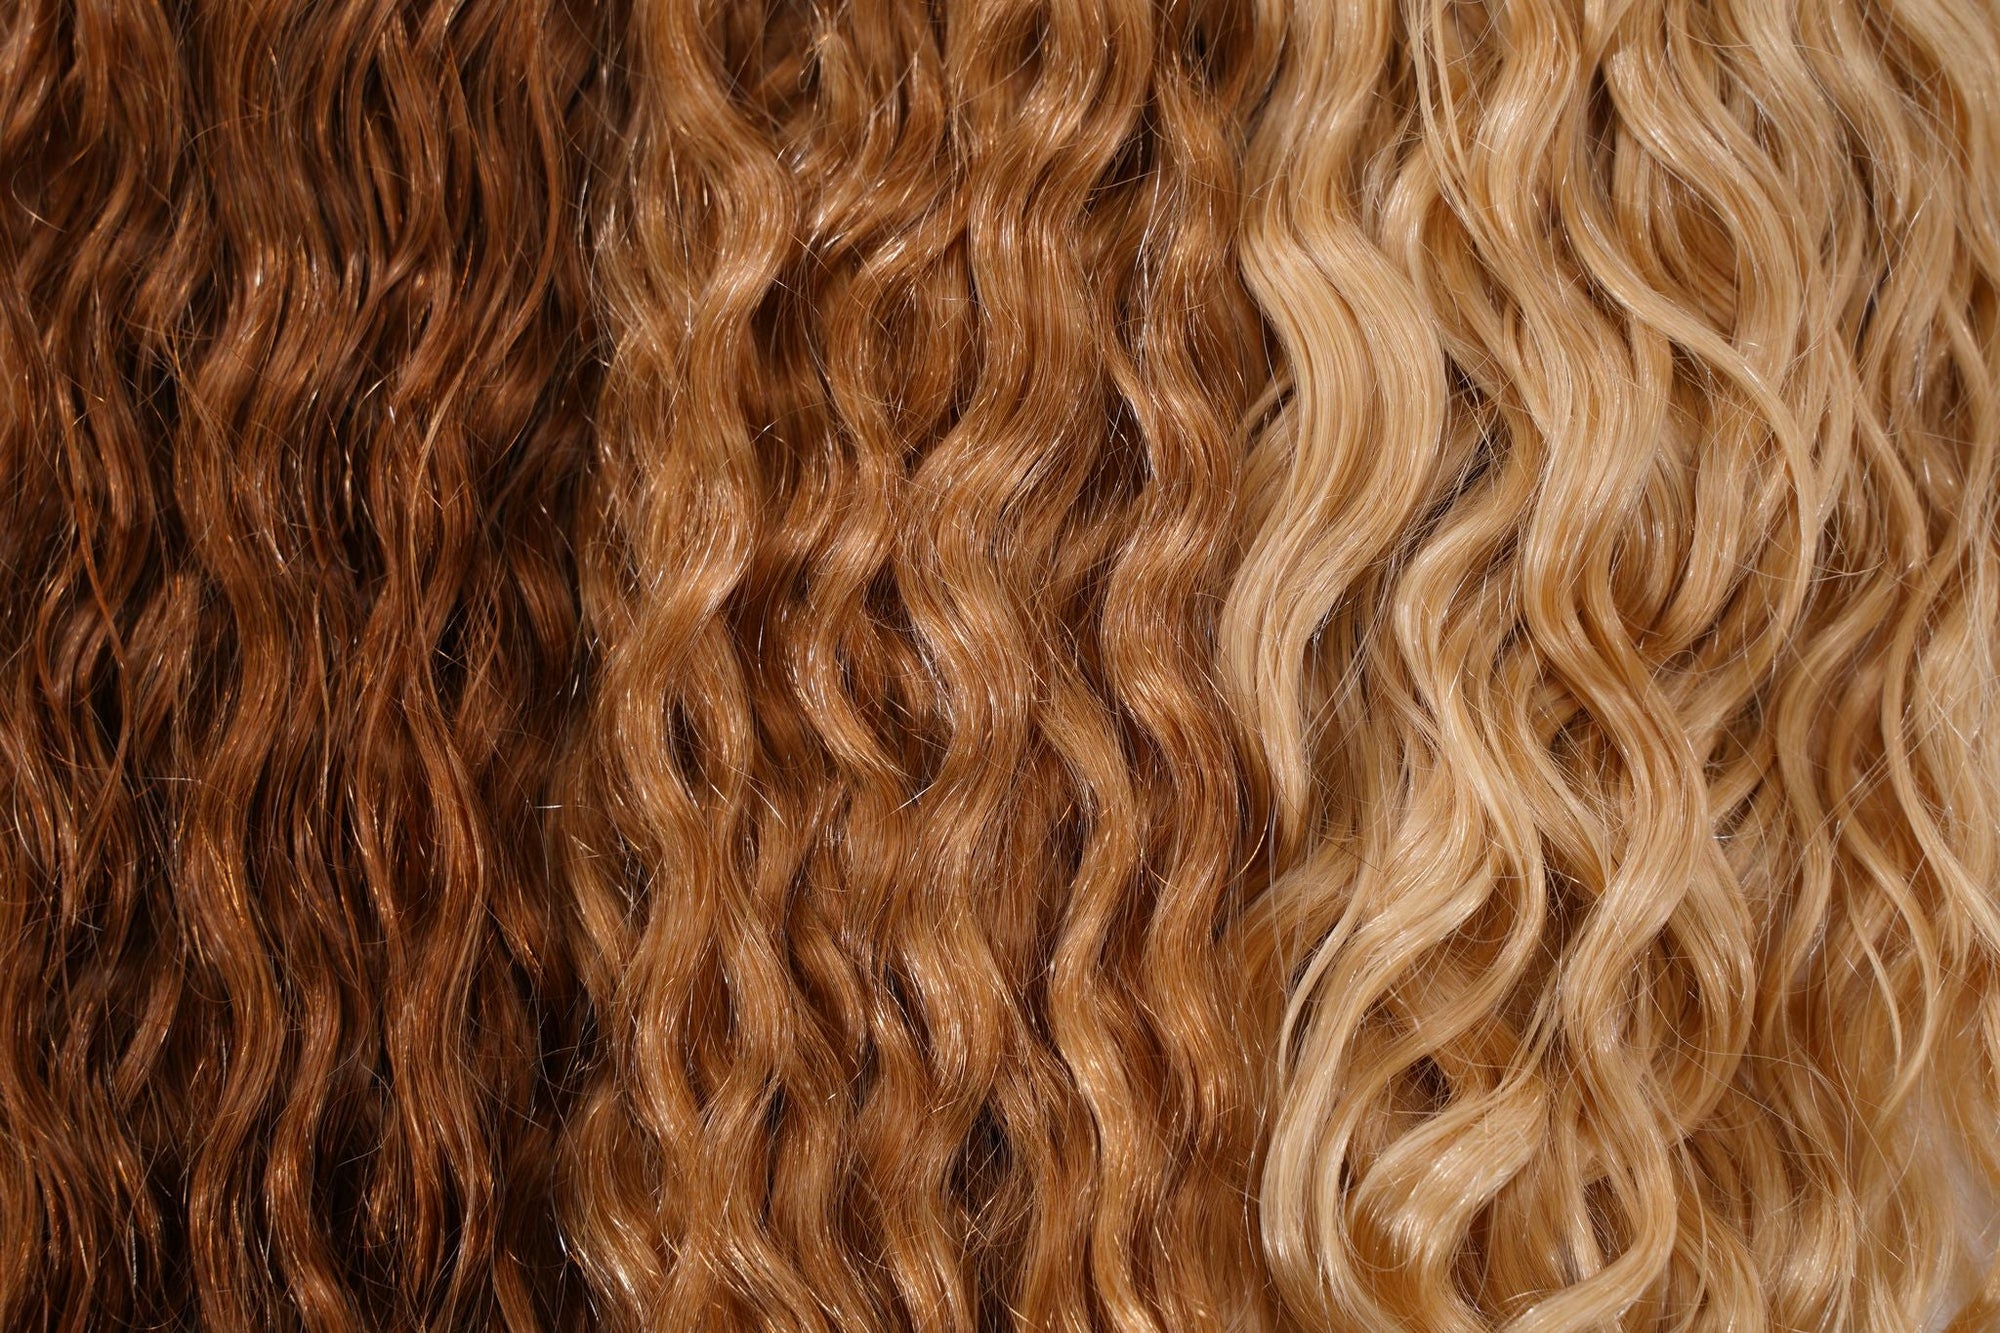 Choosing the Right Hair Extension Color